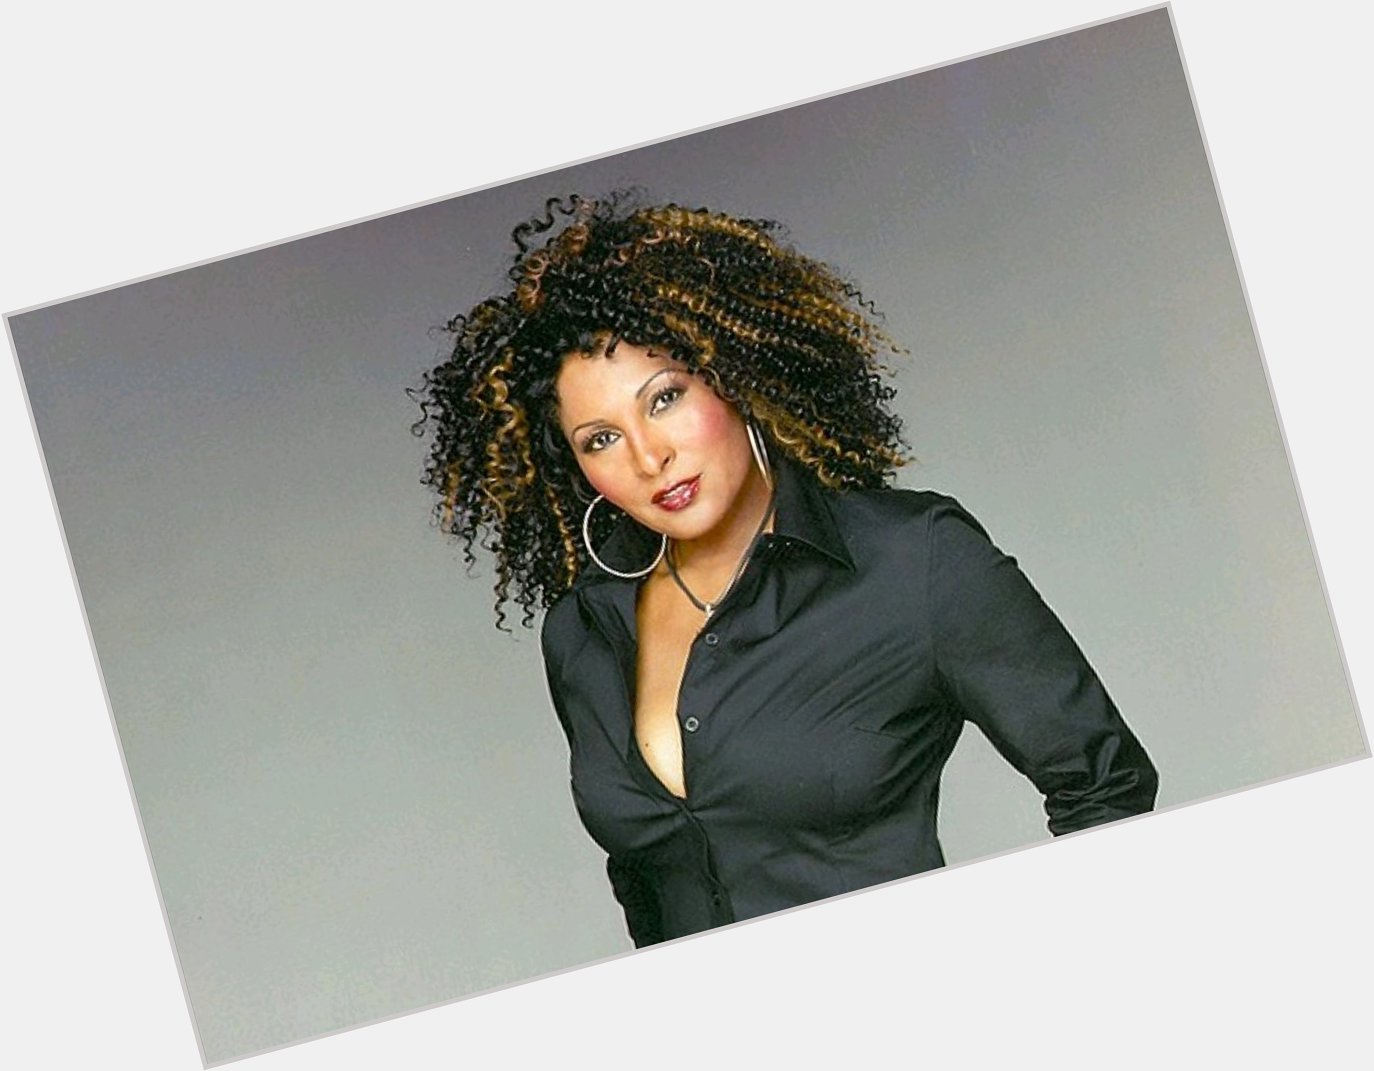 HAPPY BIRTHDAY PAM GRIER. MAY 26TH 1949 